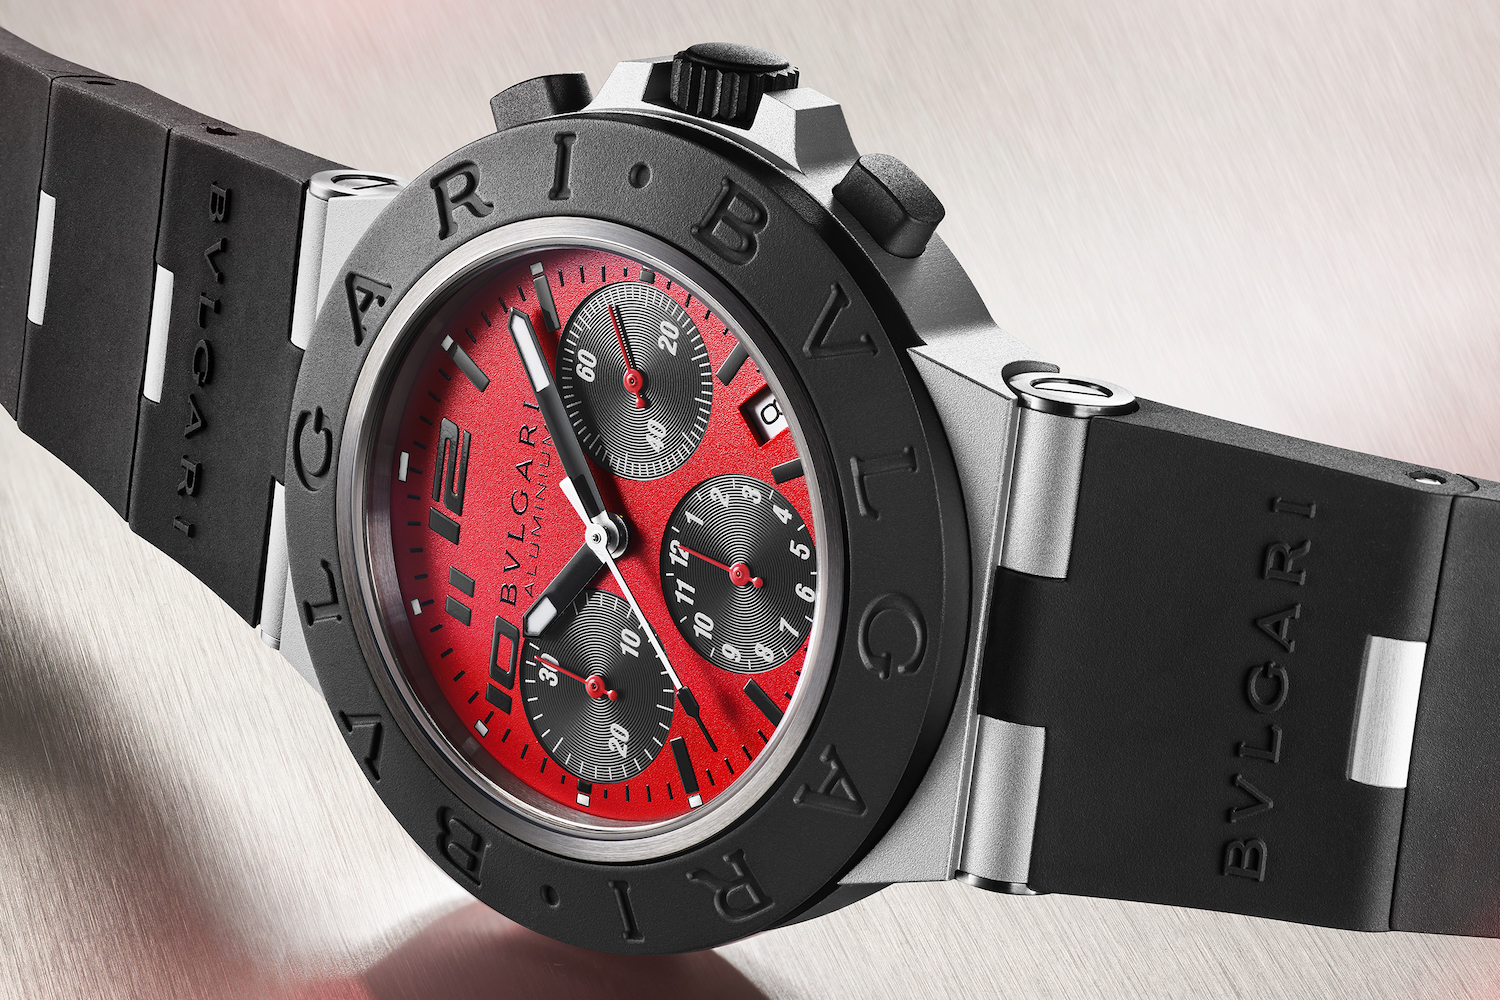 Bulgari Release Their Sportiest Watch Yet With Famous Italian Motorcycle Brand